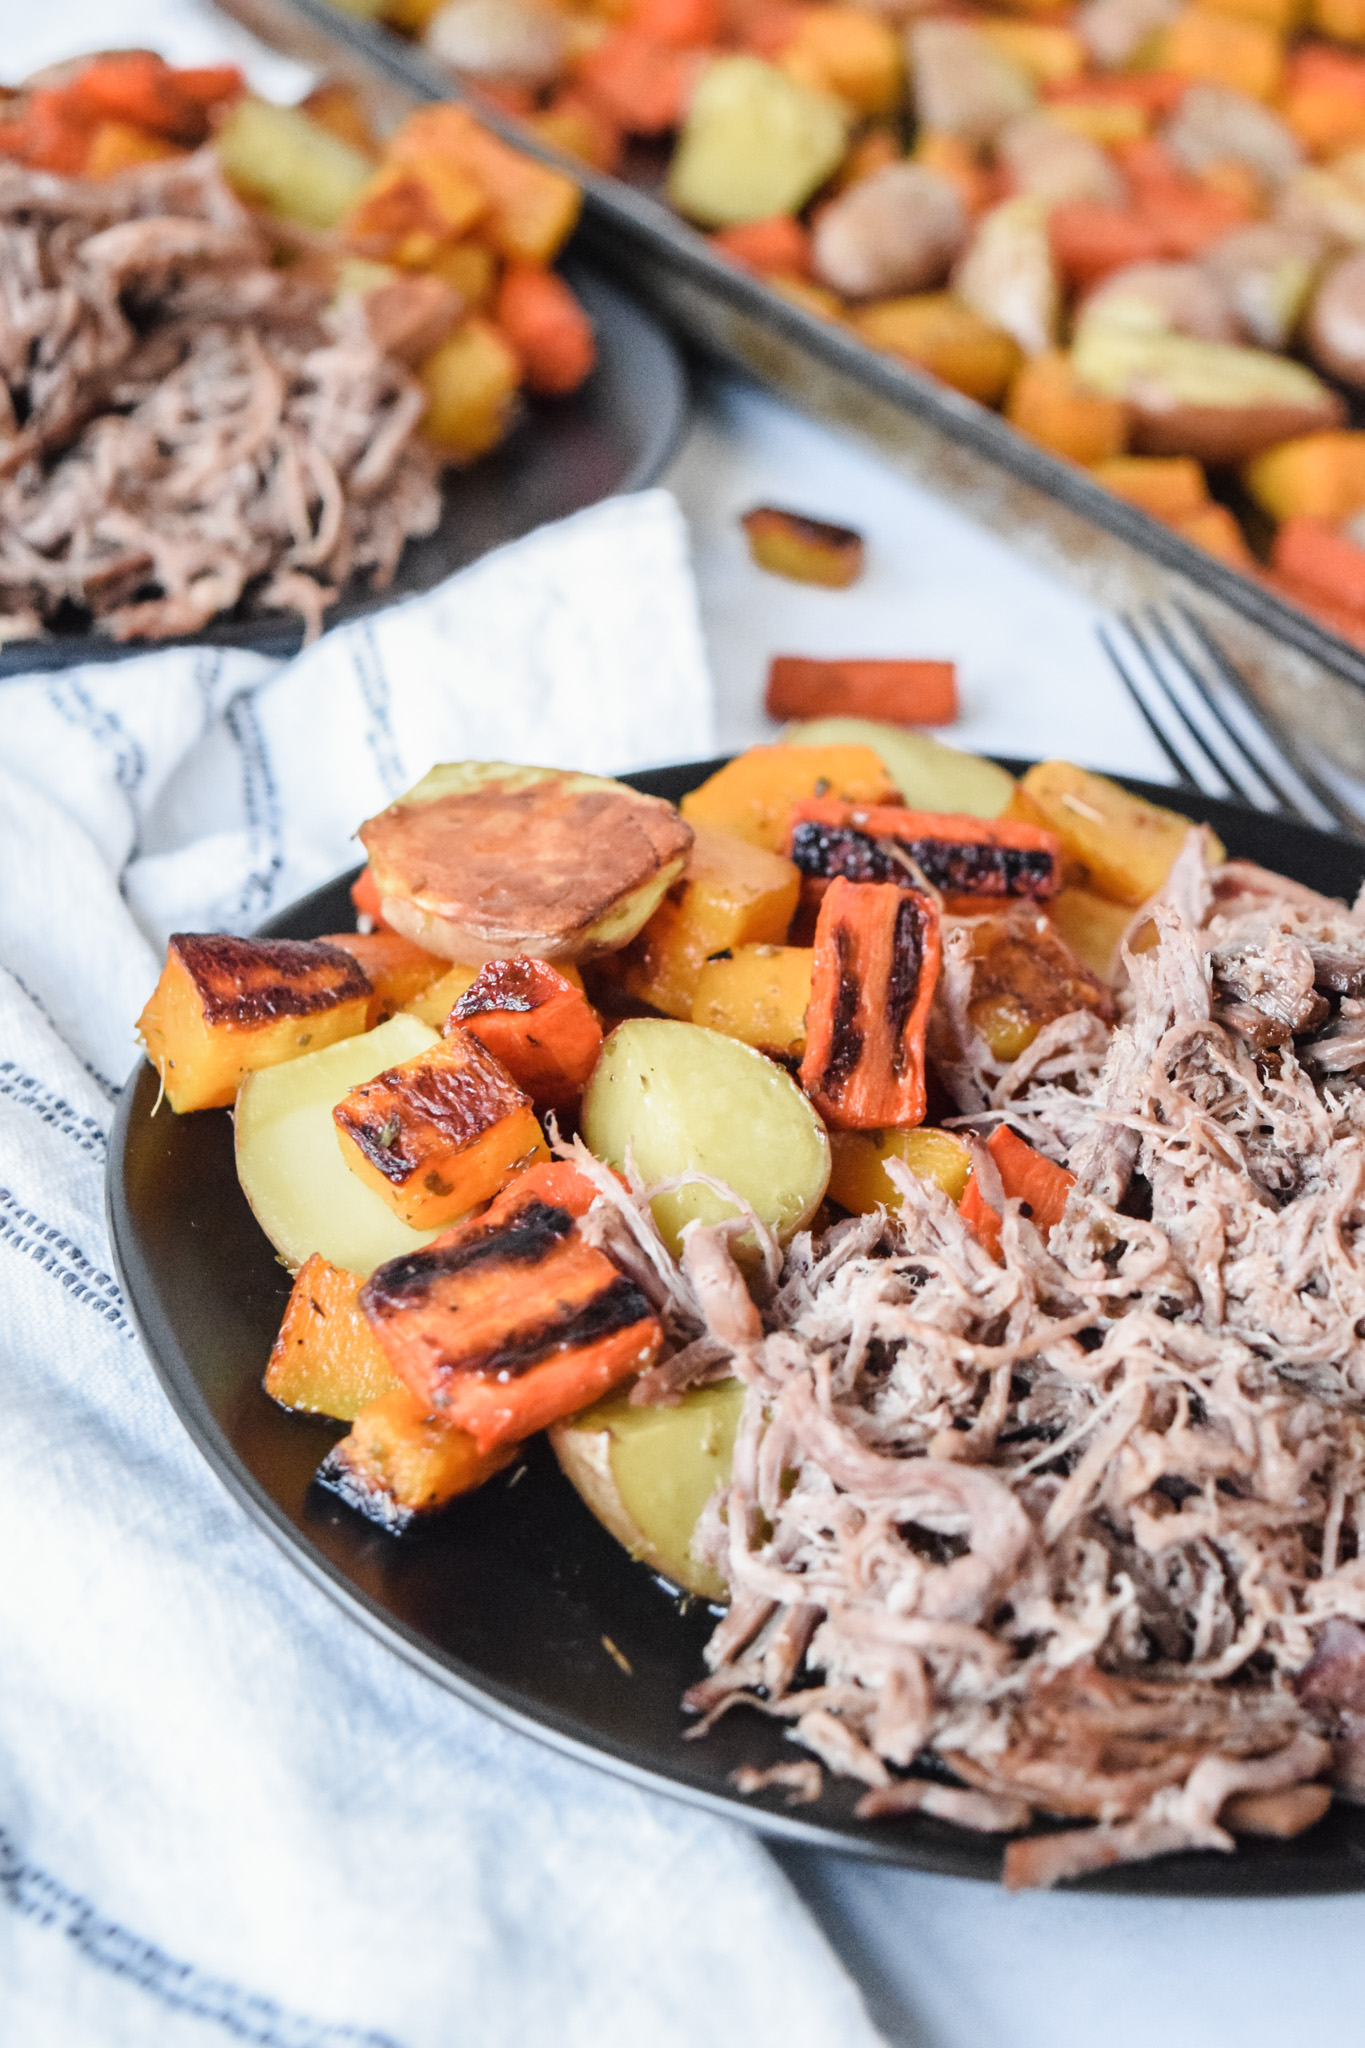 Instant Pot Roast Beef with Roasted Vegetables on a Black Plate